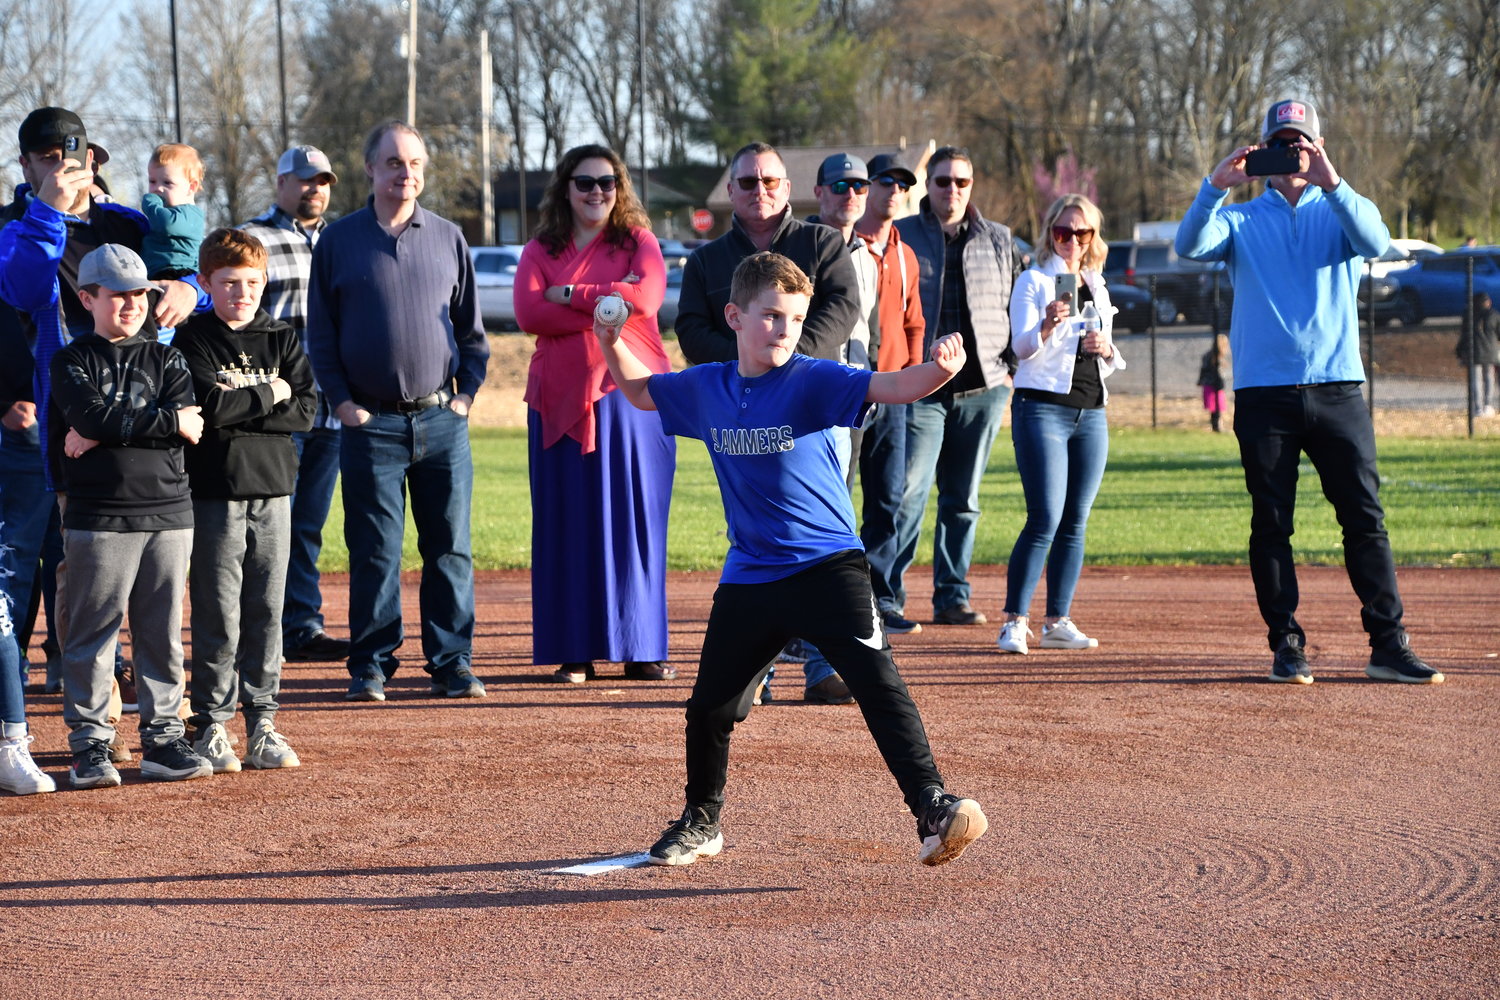 Reid Brown, the son of the late Ross Brown, throws out the first pitch on the field which bears the name of his father.